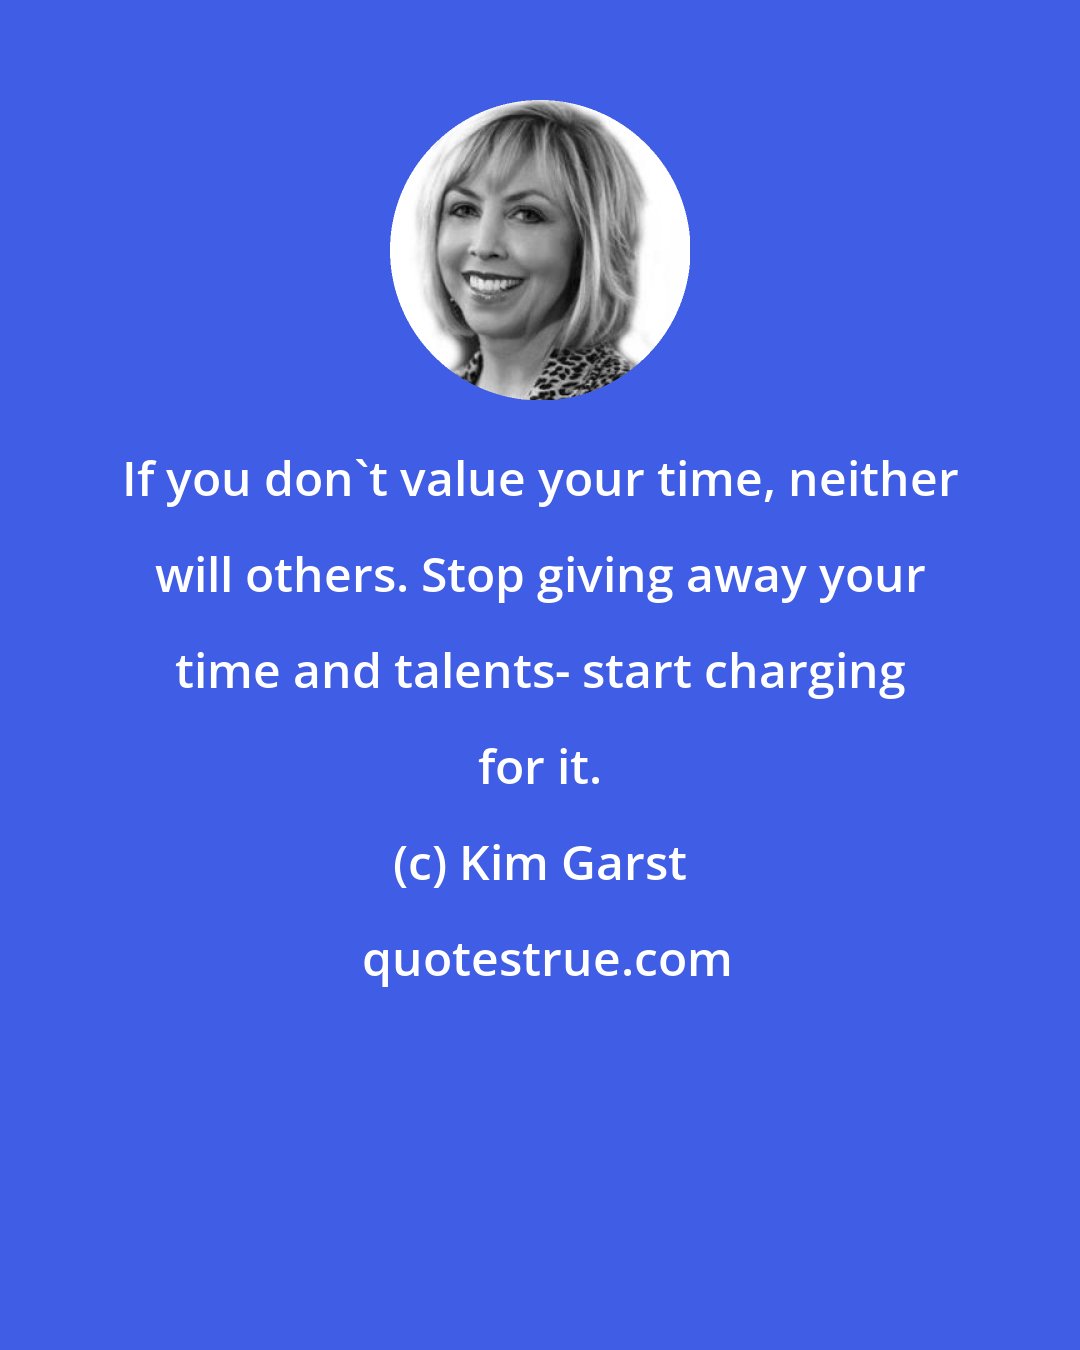 Kim Garst: If you don't value your time, neither will others. Stop giving away your time and talents- start charging for it.